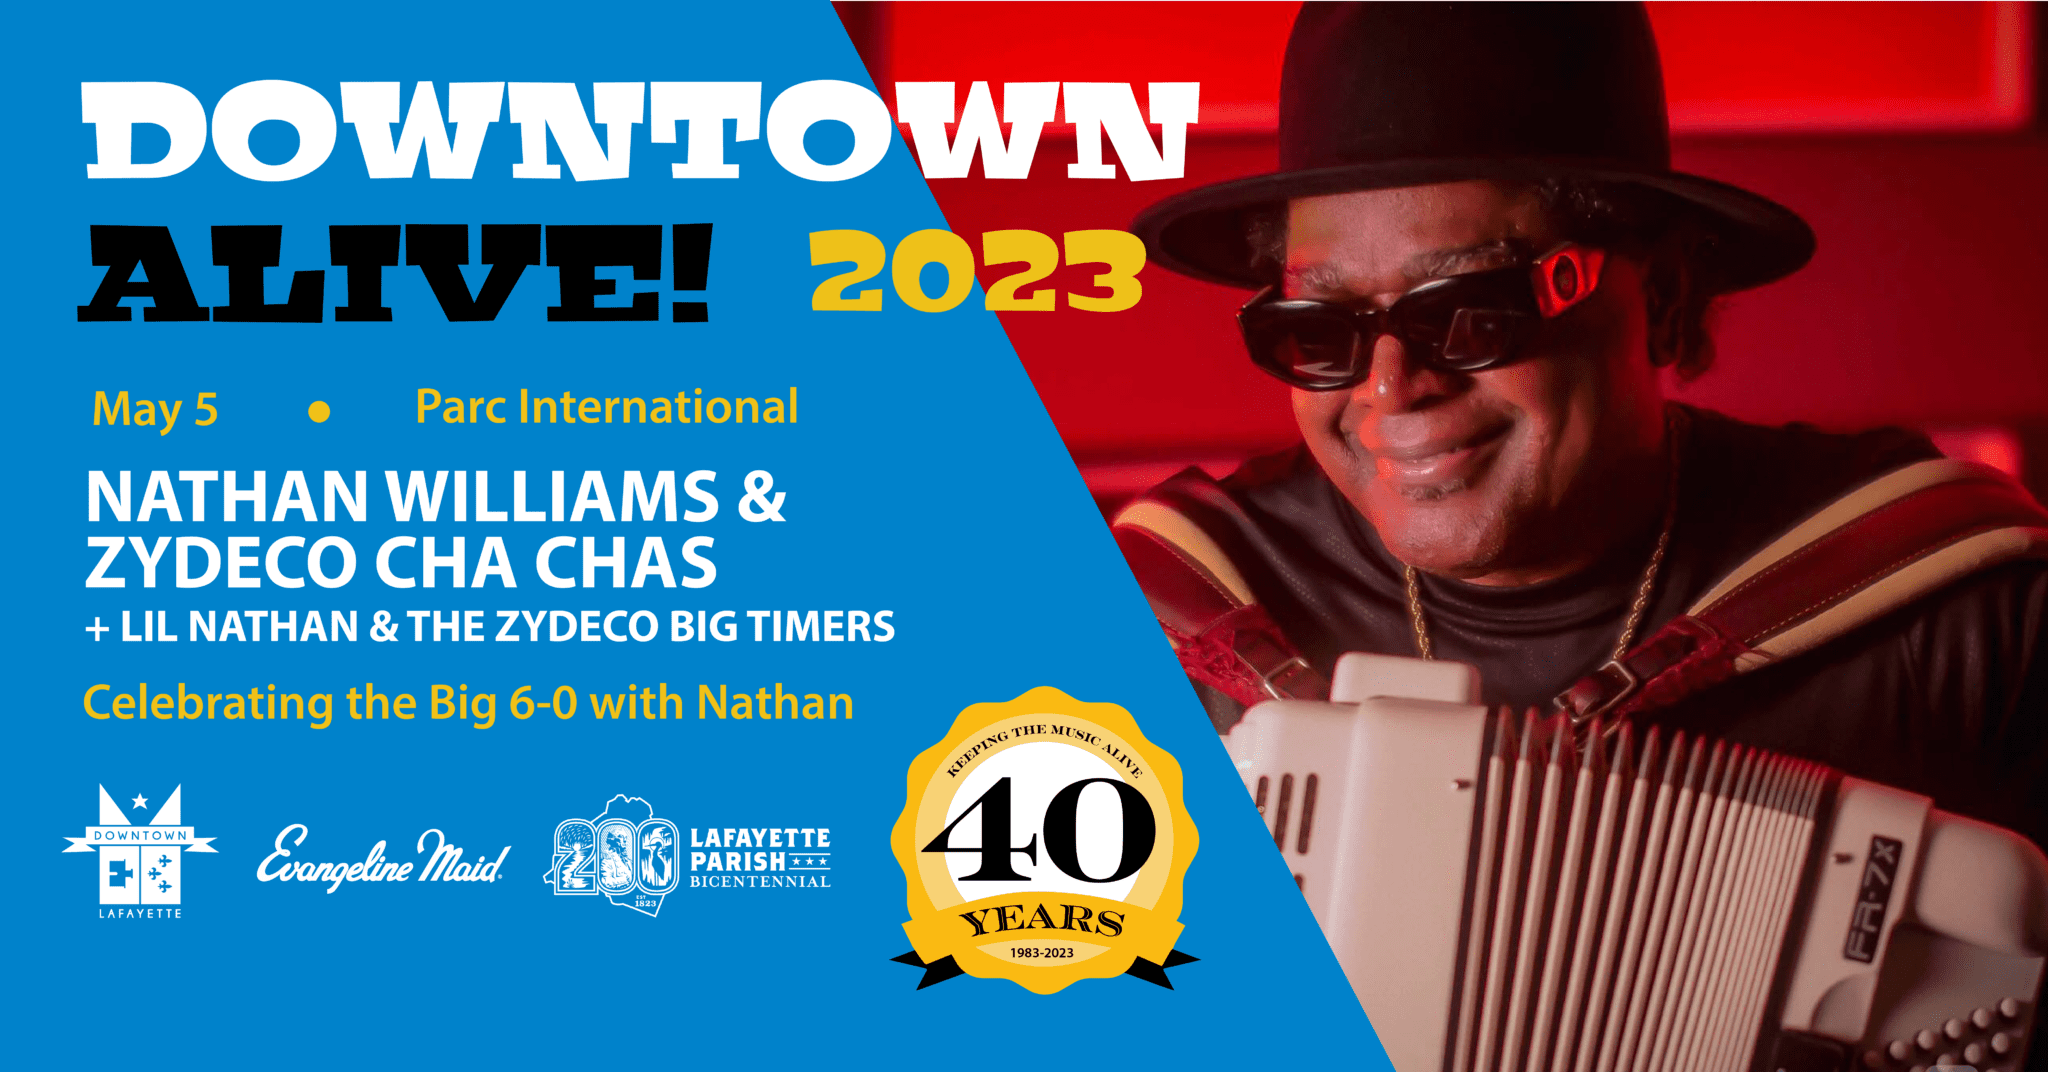 Downtown Alive! ft. Nathan Williams & Zydeco Cha Chas + Lil Nathan